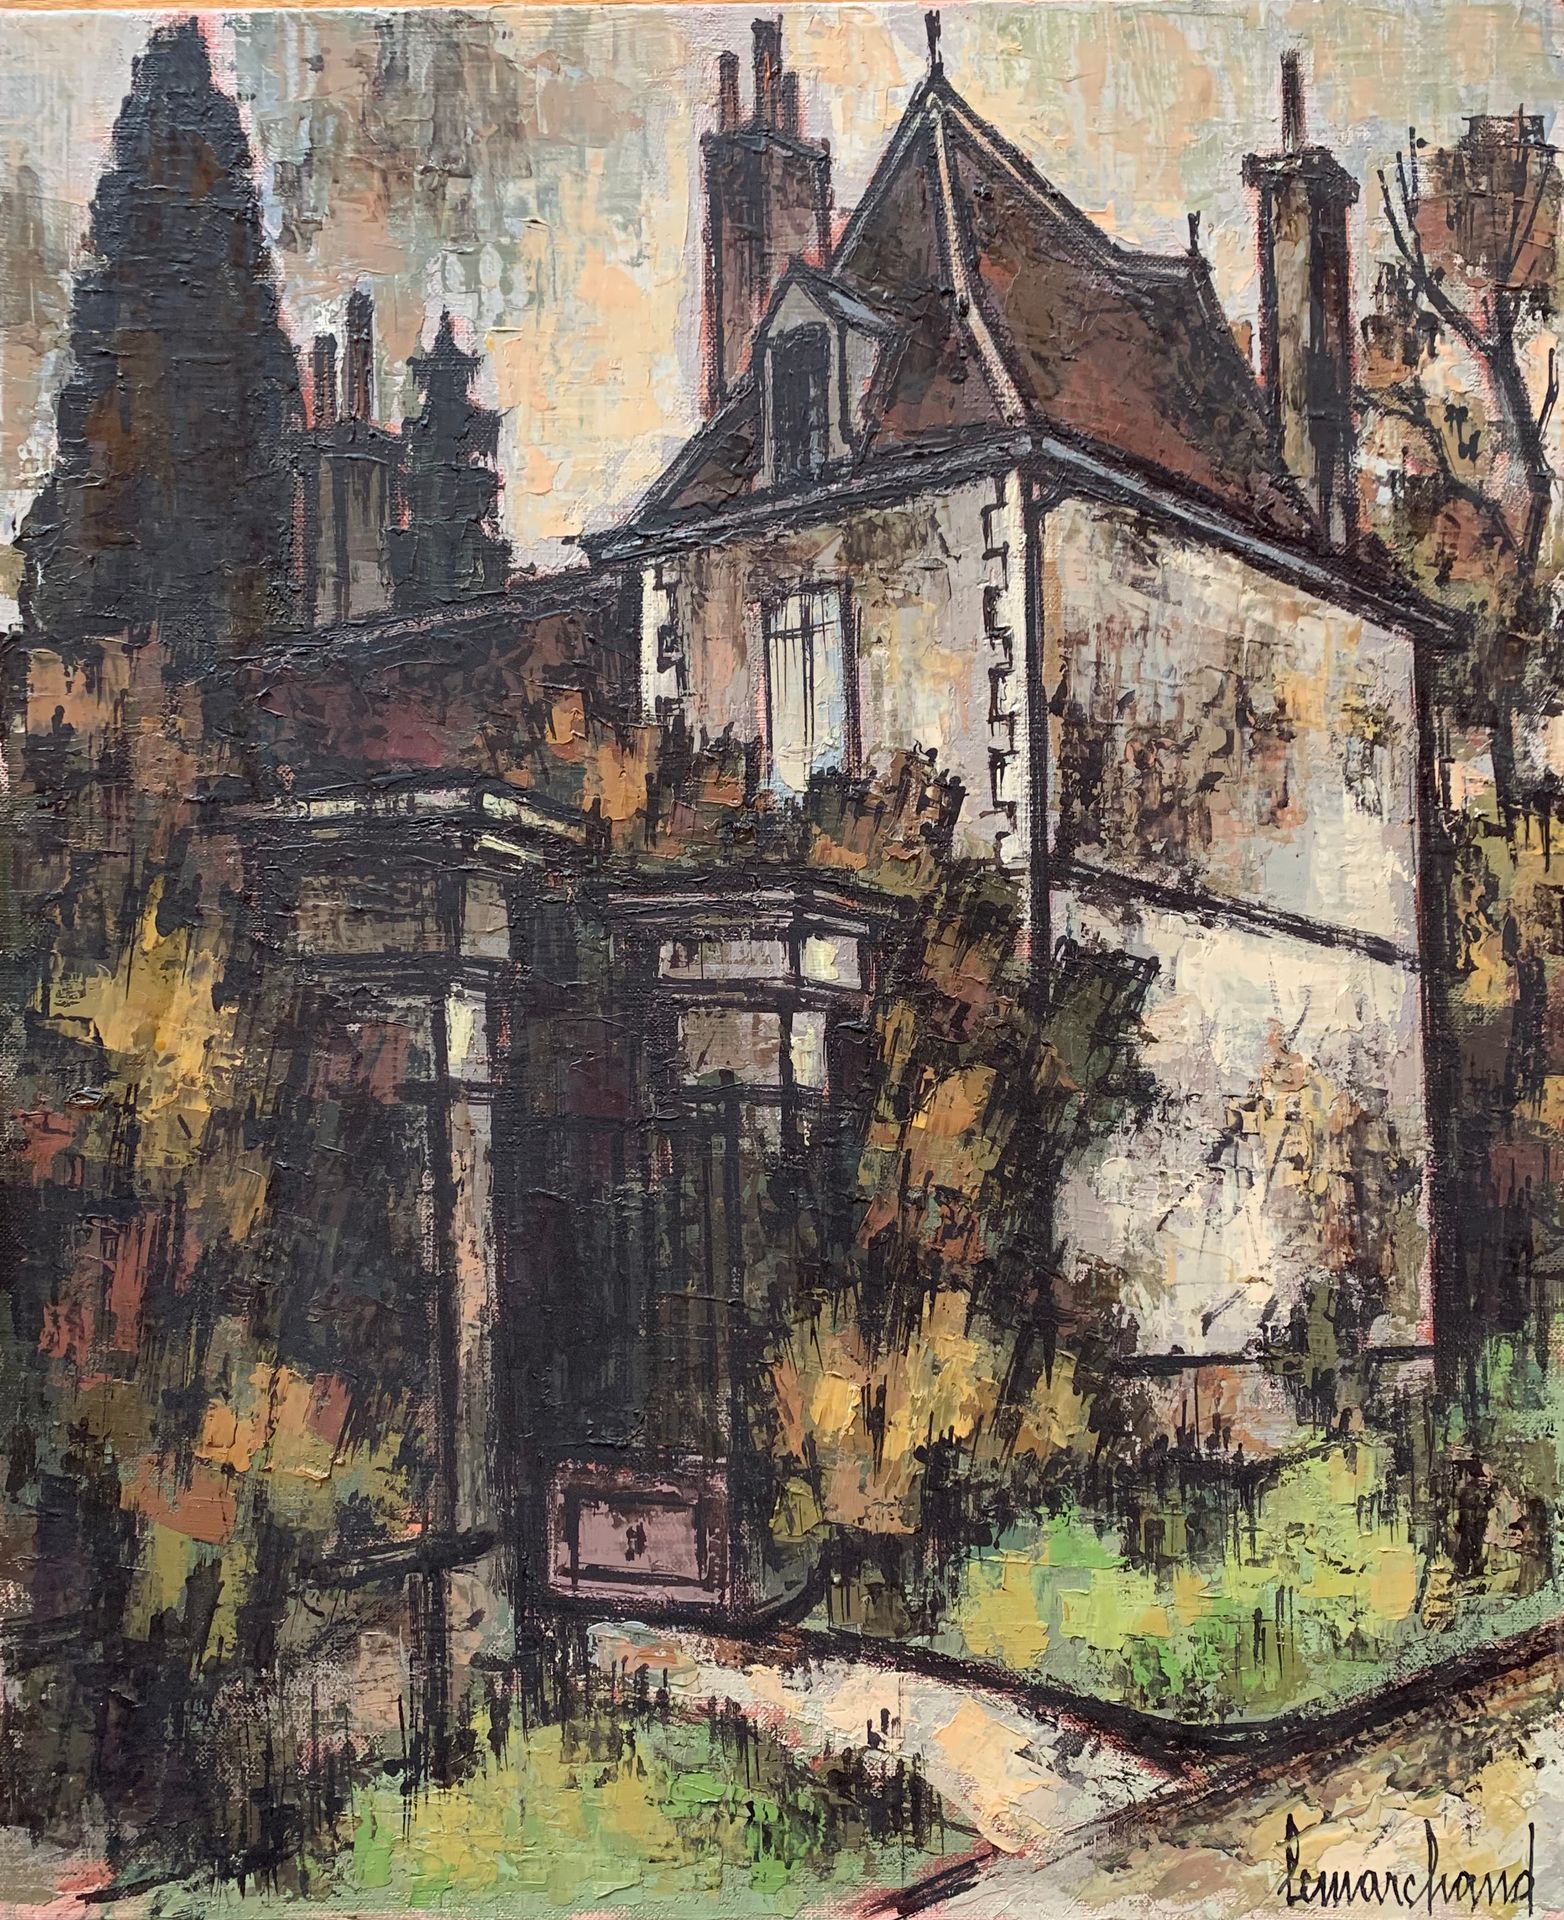 Null Pierre LEMARCHAND (1906-1970)

House with a gate, town of Chassenay

Oil on&hellip;